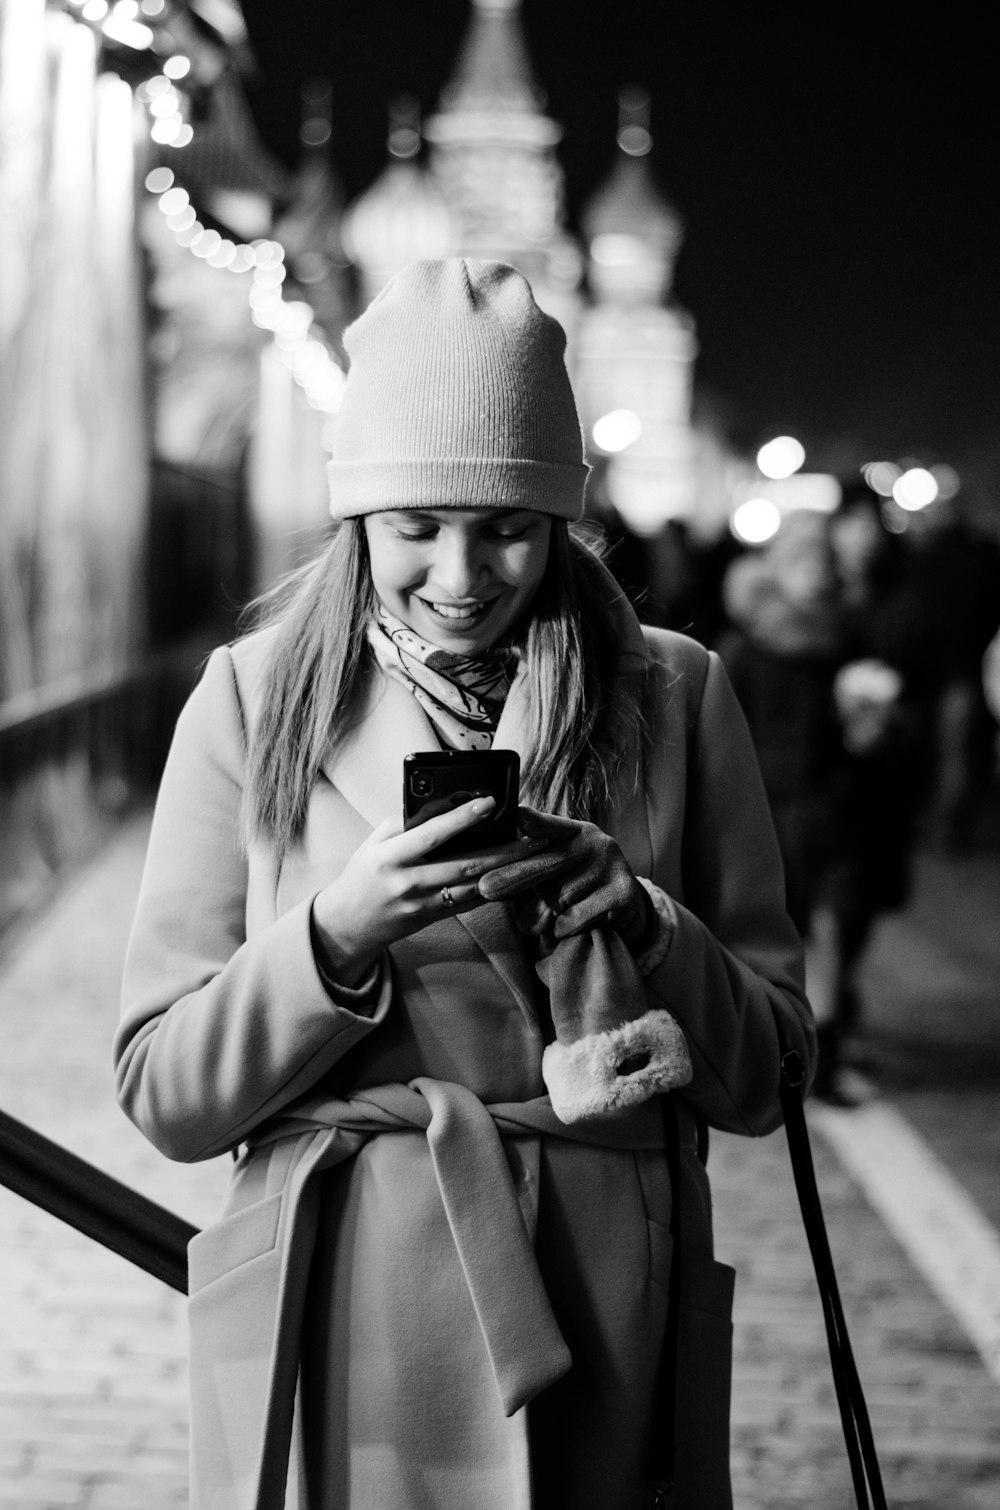 woman in knit cap and coat holding smartphone